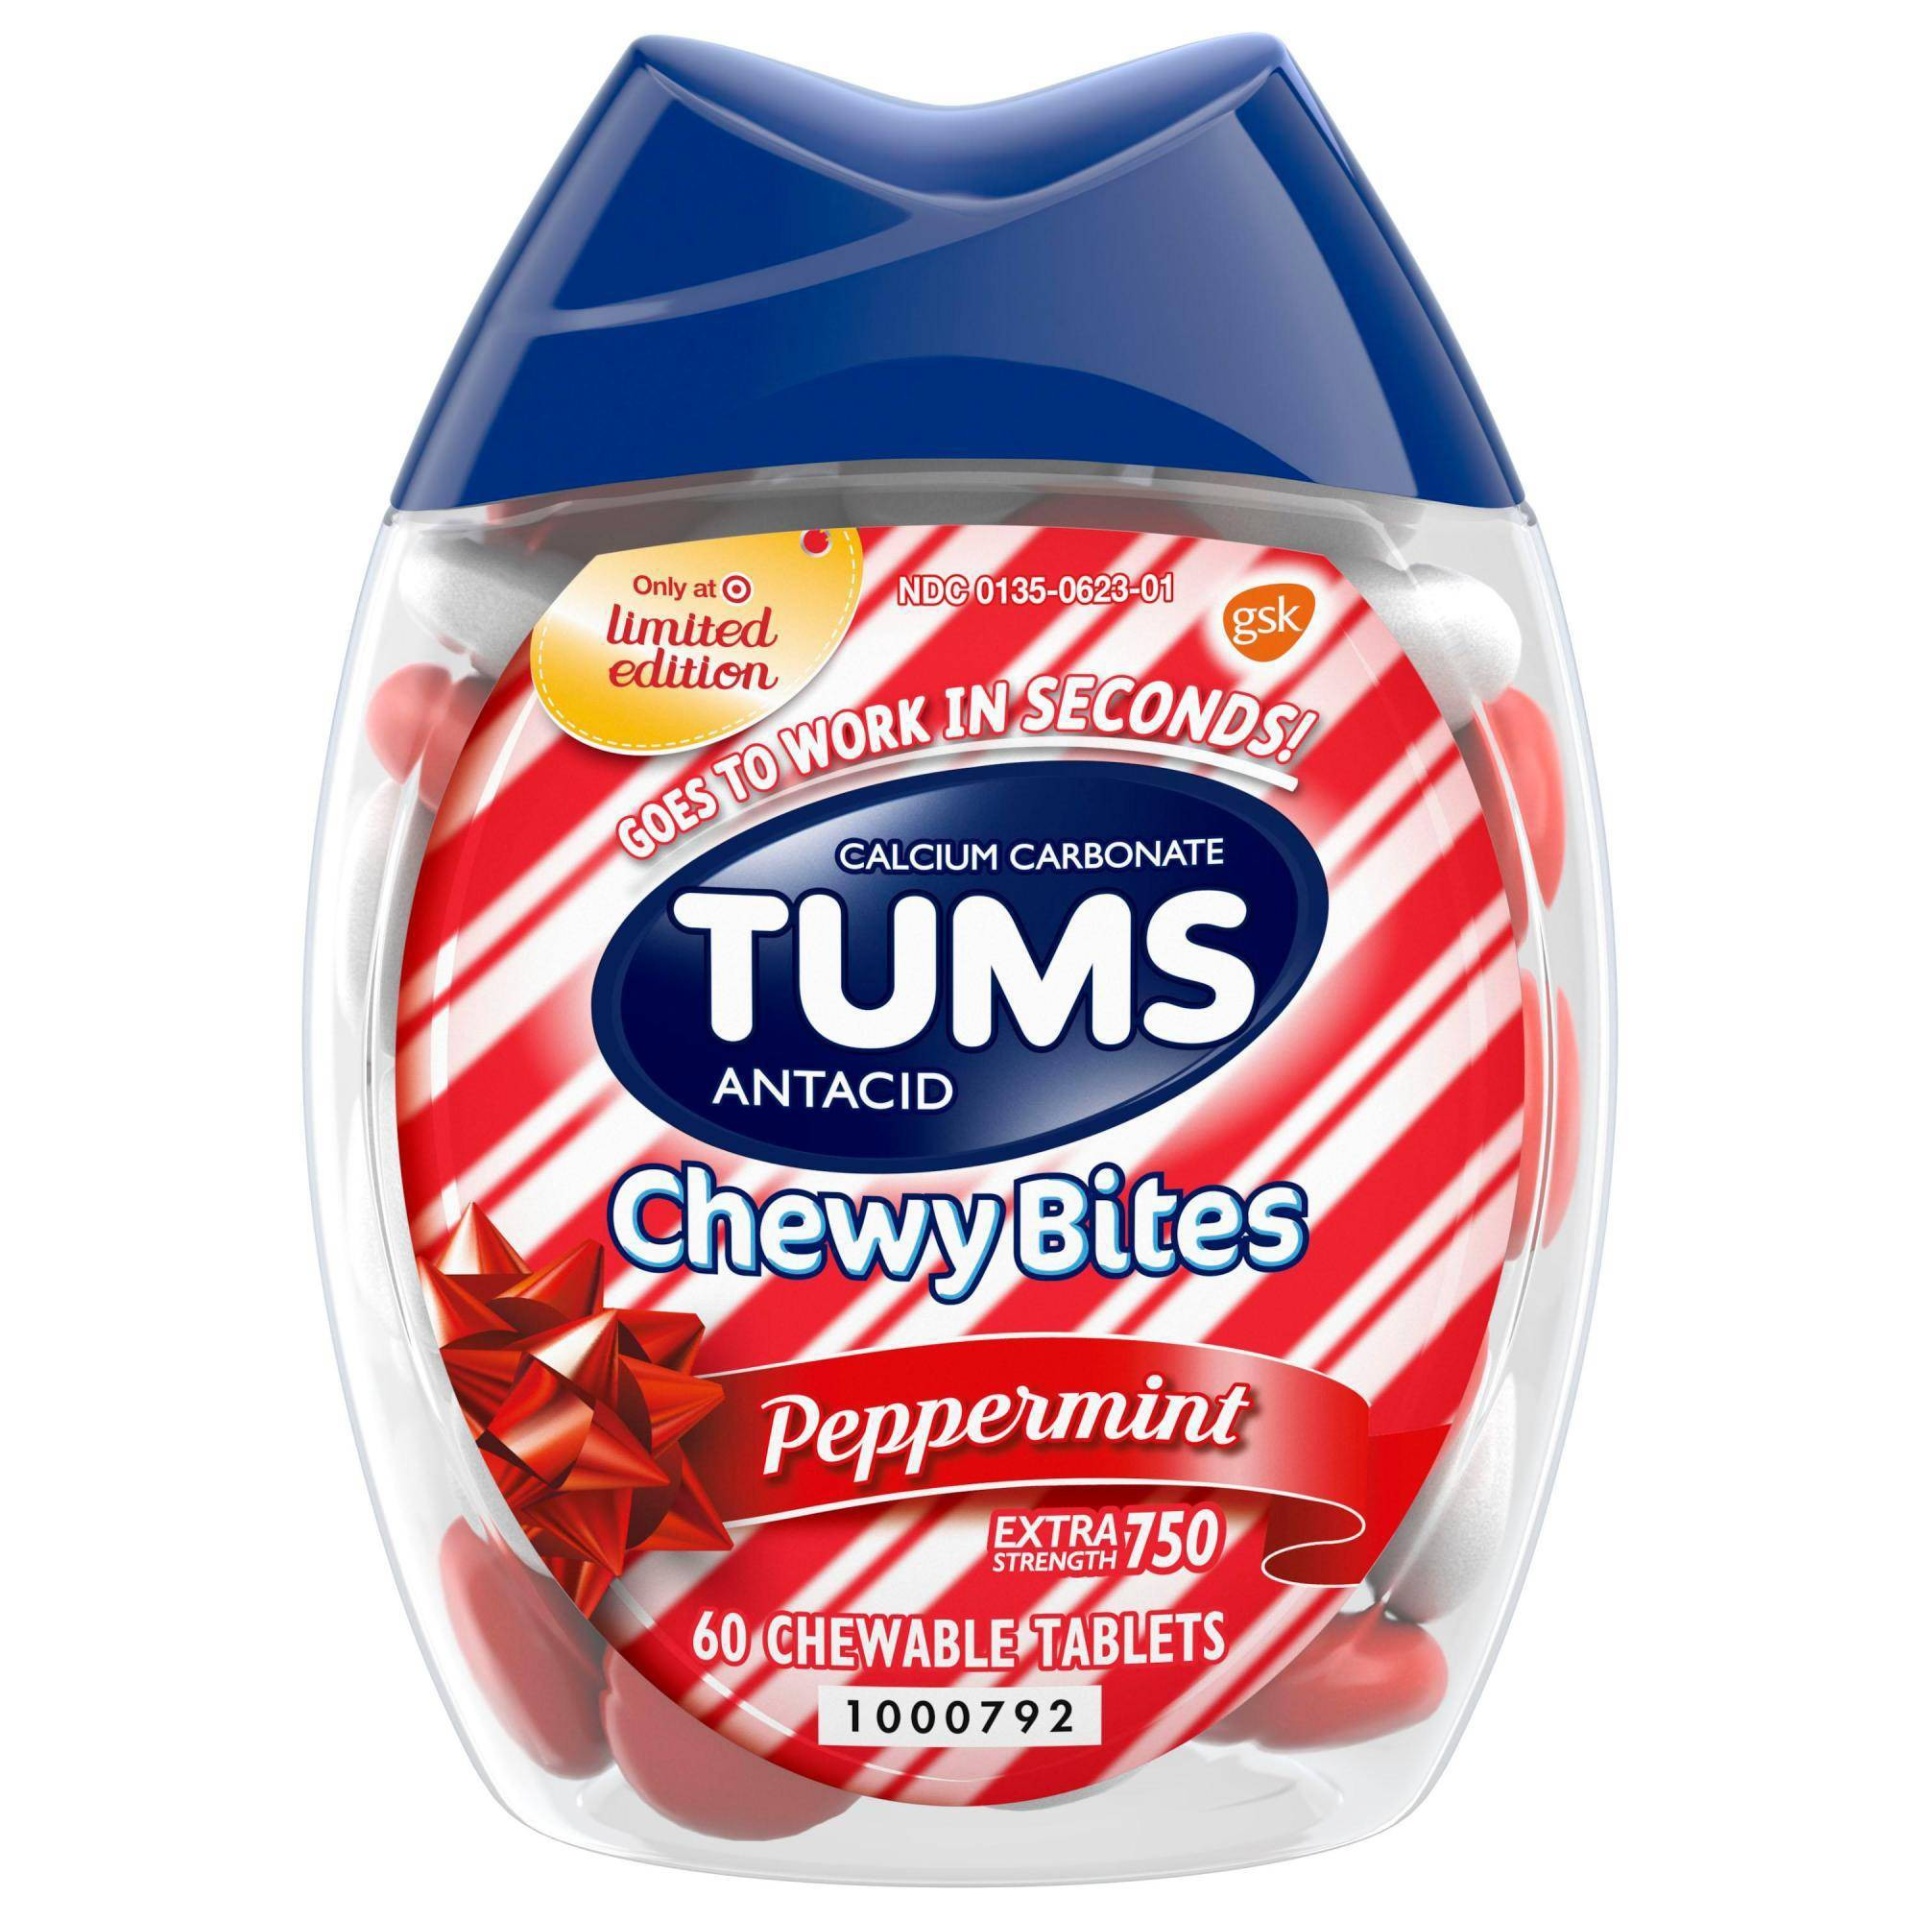 slide 1 of 9, Tums Chewy Bites Peppermint Extra Strength Chewable Antacid for Heartburn - 60ct, 60 ct